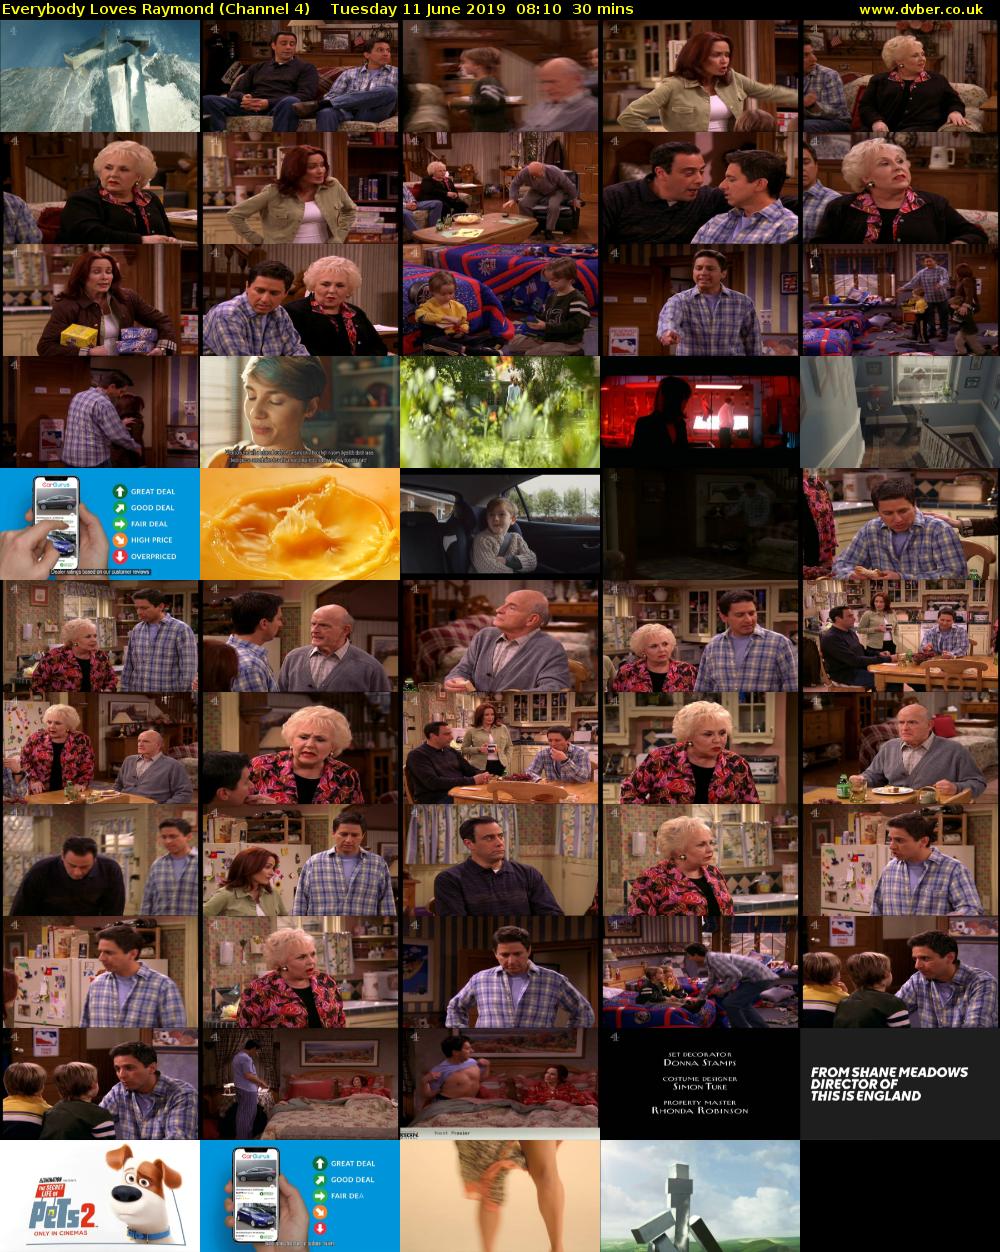 Everybody Loves Raymond (Channel 4) Tuesday 11 June 2019 08:10 - 08:40